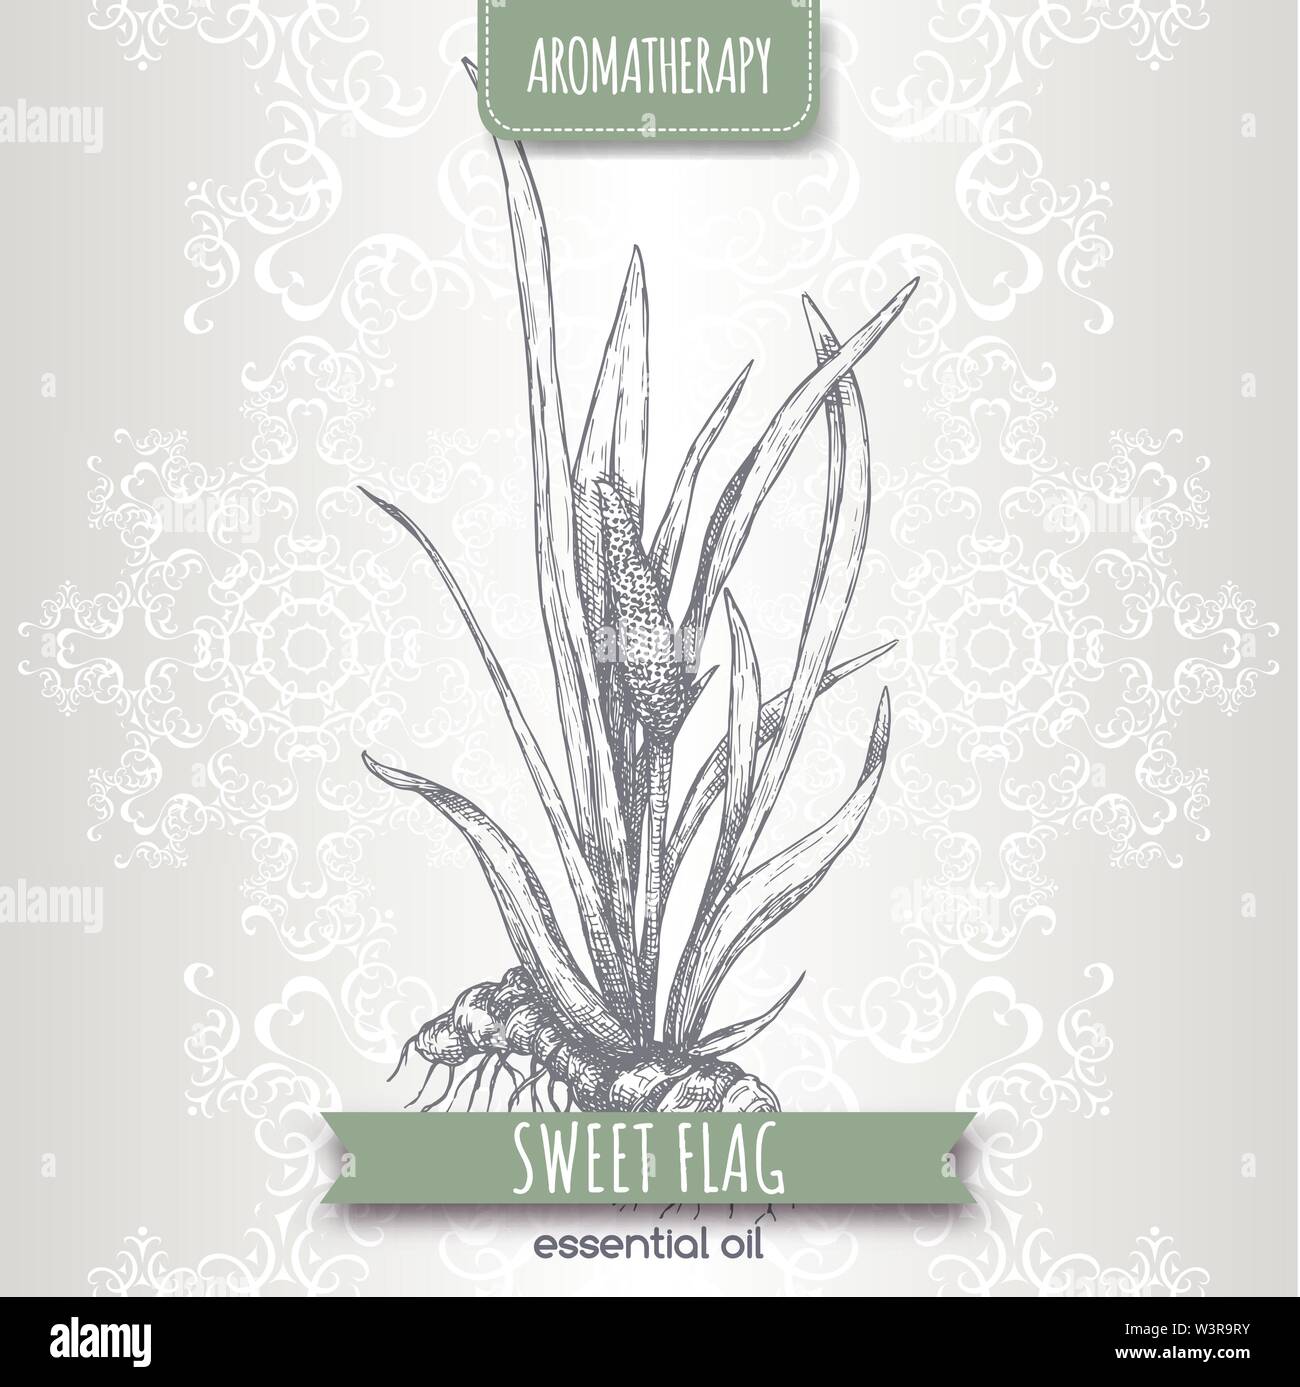 Acorus calamus aka sweet flag sketch on elegant lace background. Great for traditional medicine, perfume design, cooking or gardening. Stock Vector